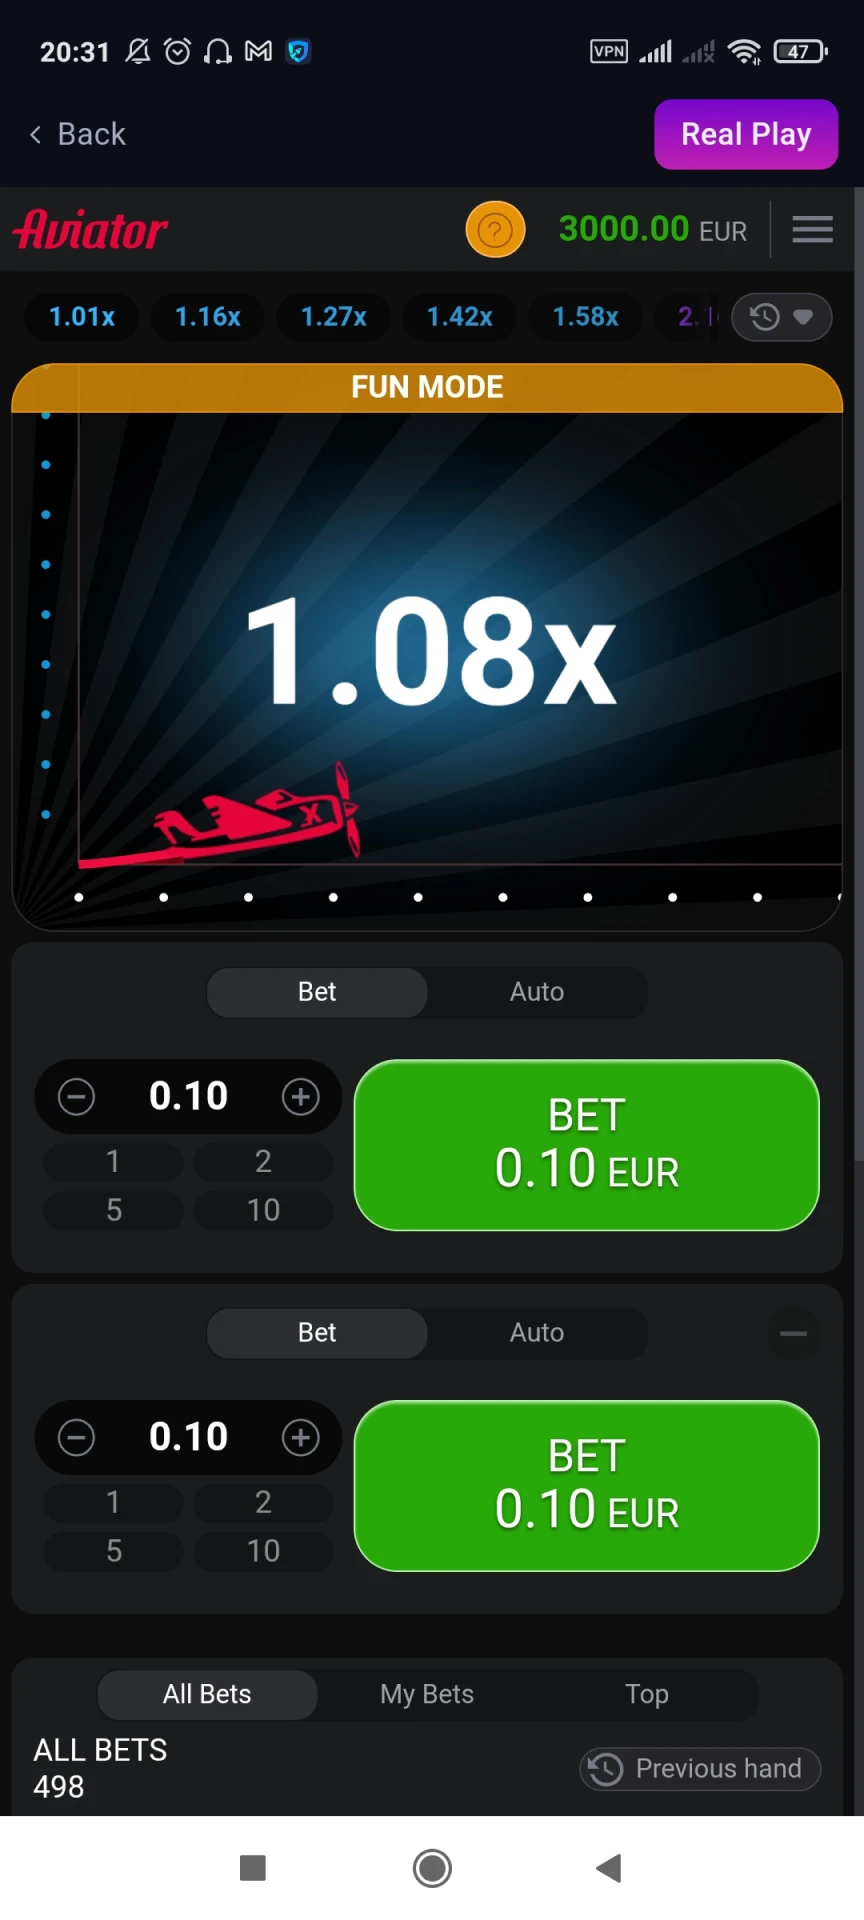 Explore the Aviator game tab of the Odds96 app.